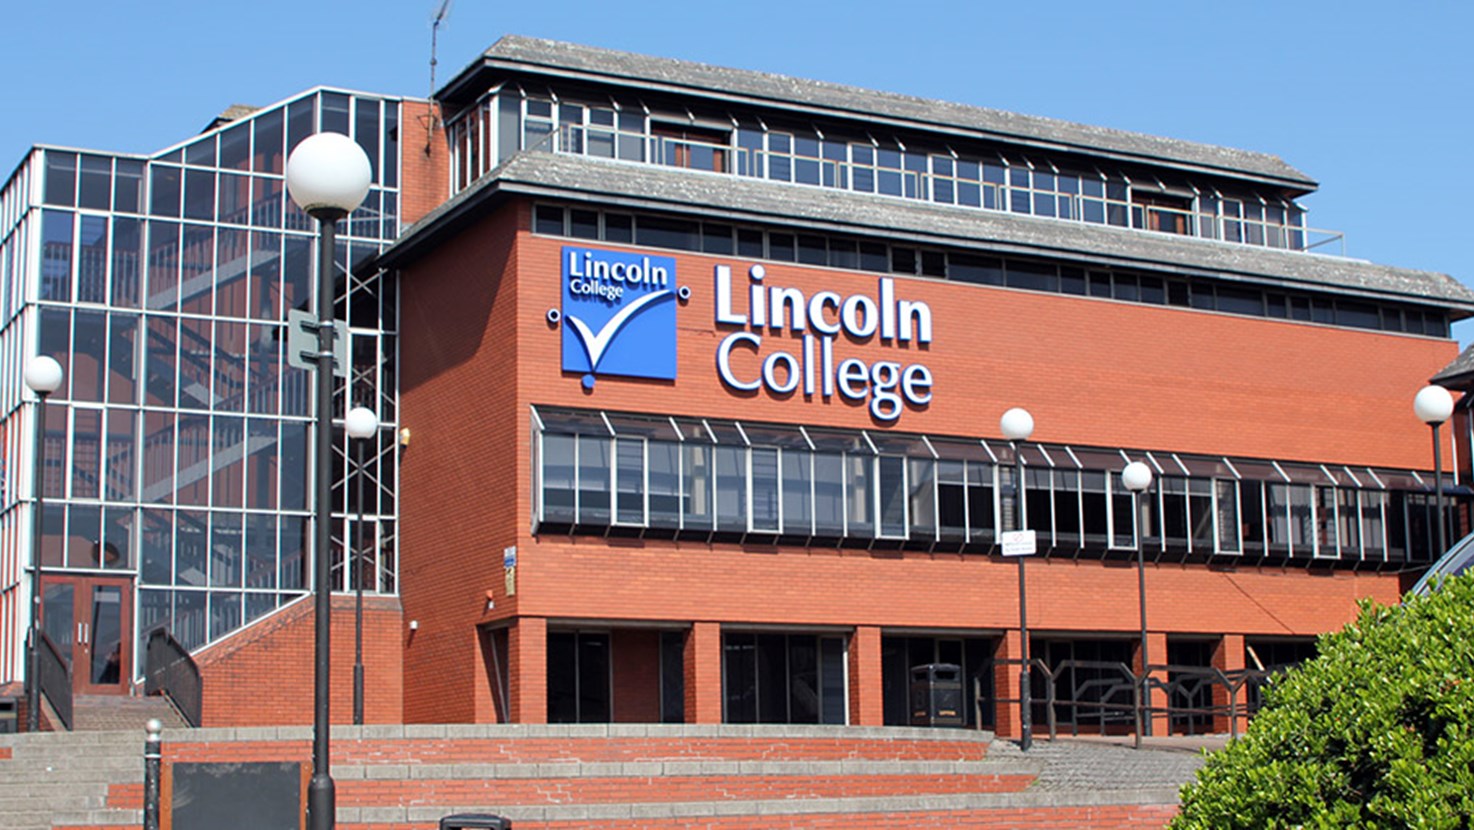 View all of the events and meetings that DPCC Phil Clark attended or hosted at Lincoln College in 2022